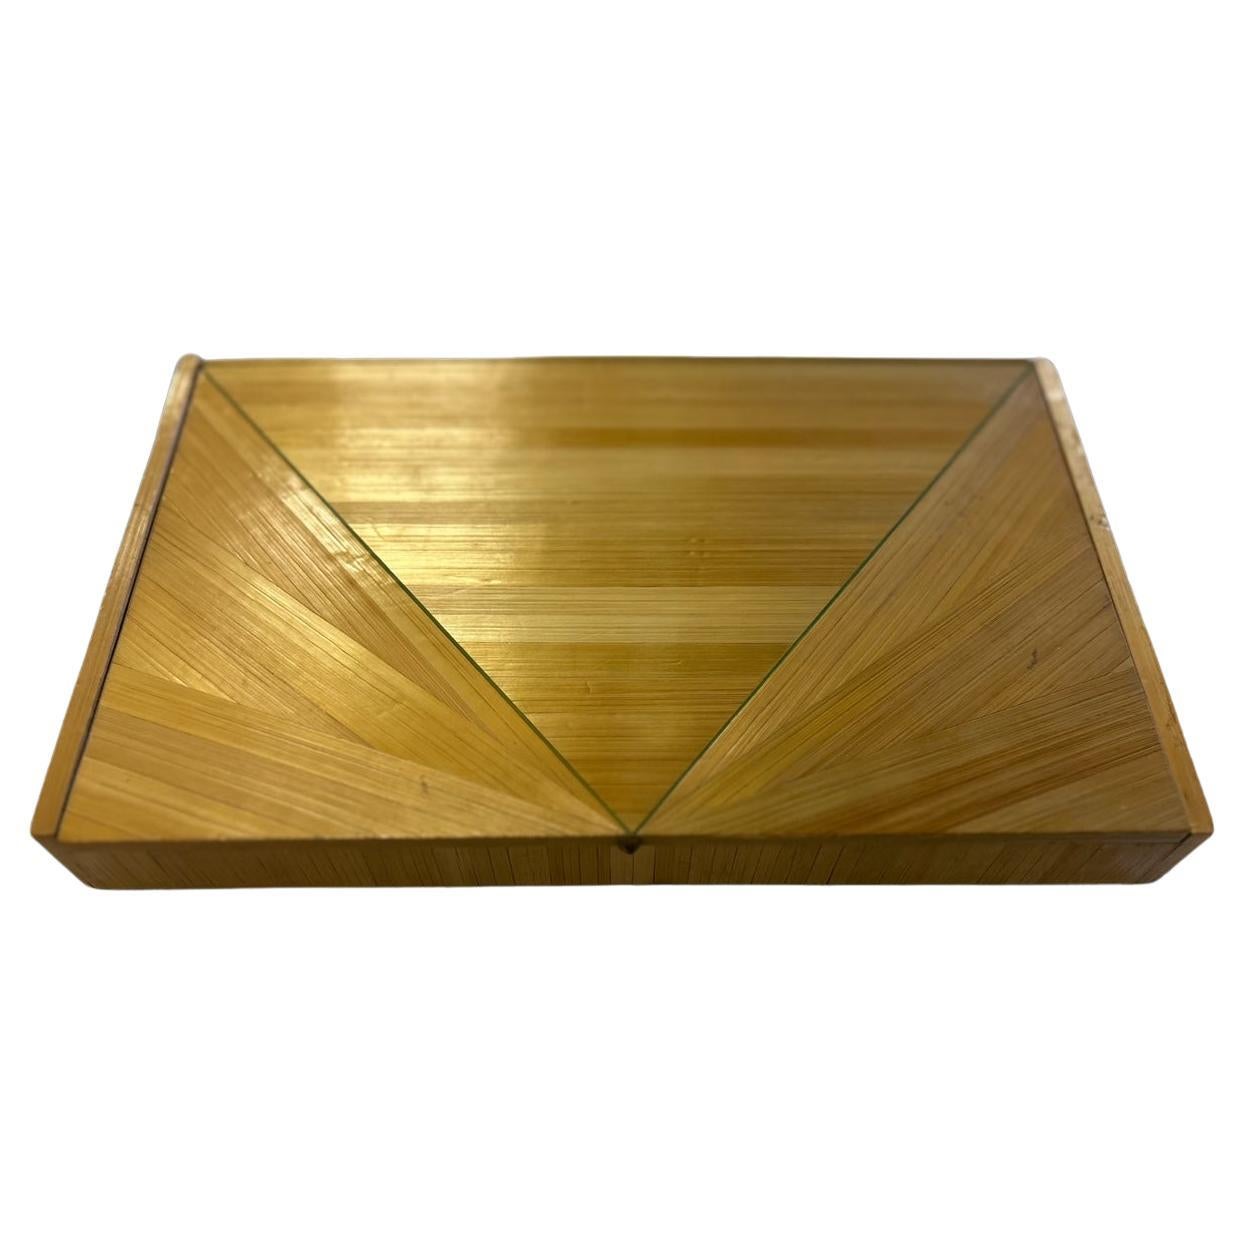 straw marquetry box attributed to Jean Michel Frank